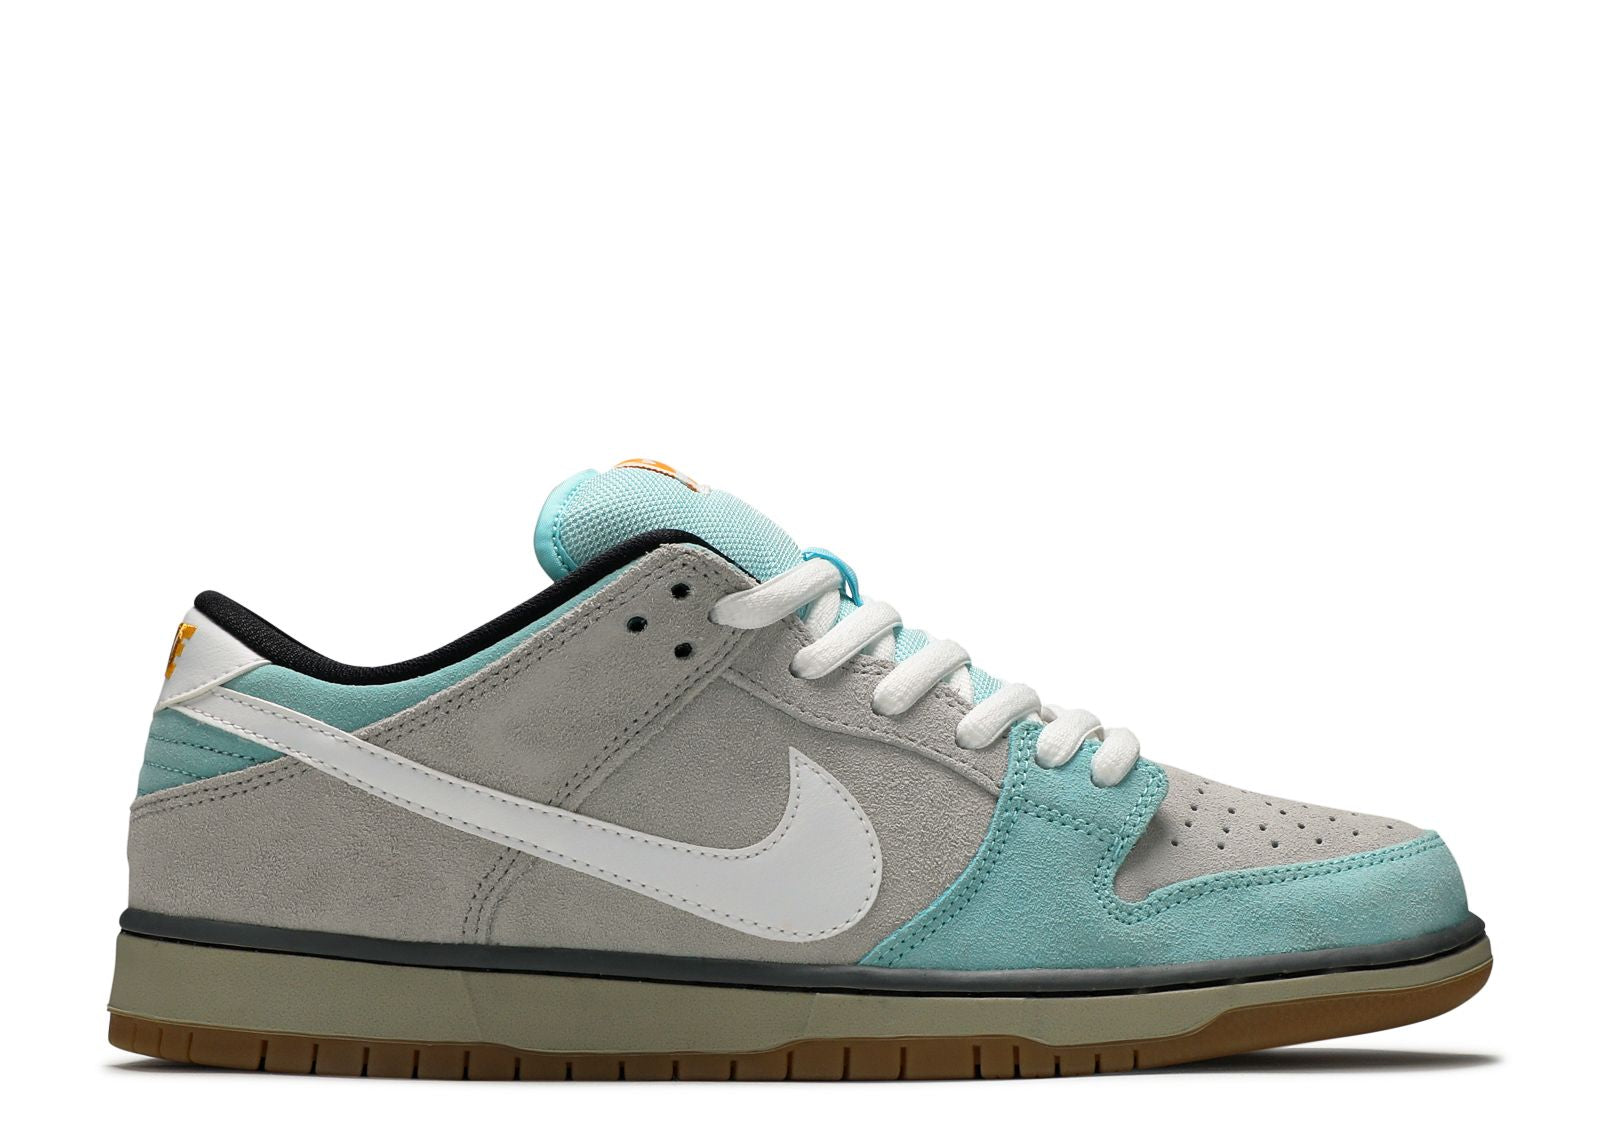 NIKE SB DUNK LOW “GULF OF MEXICO” (2014)